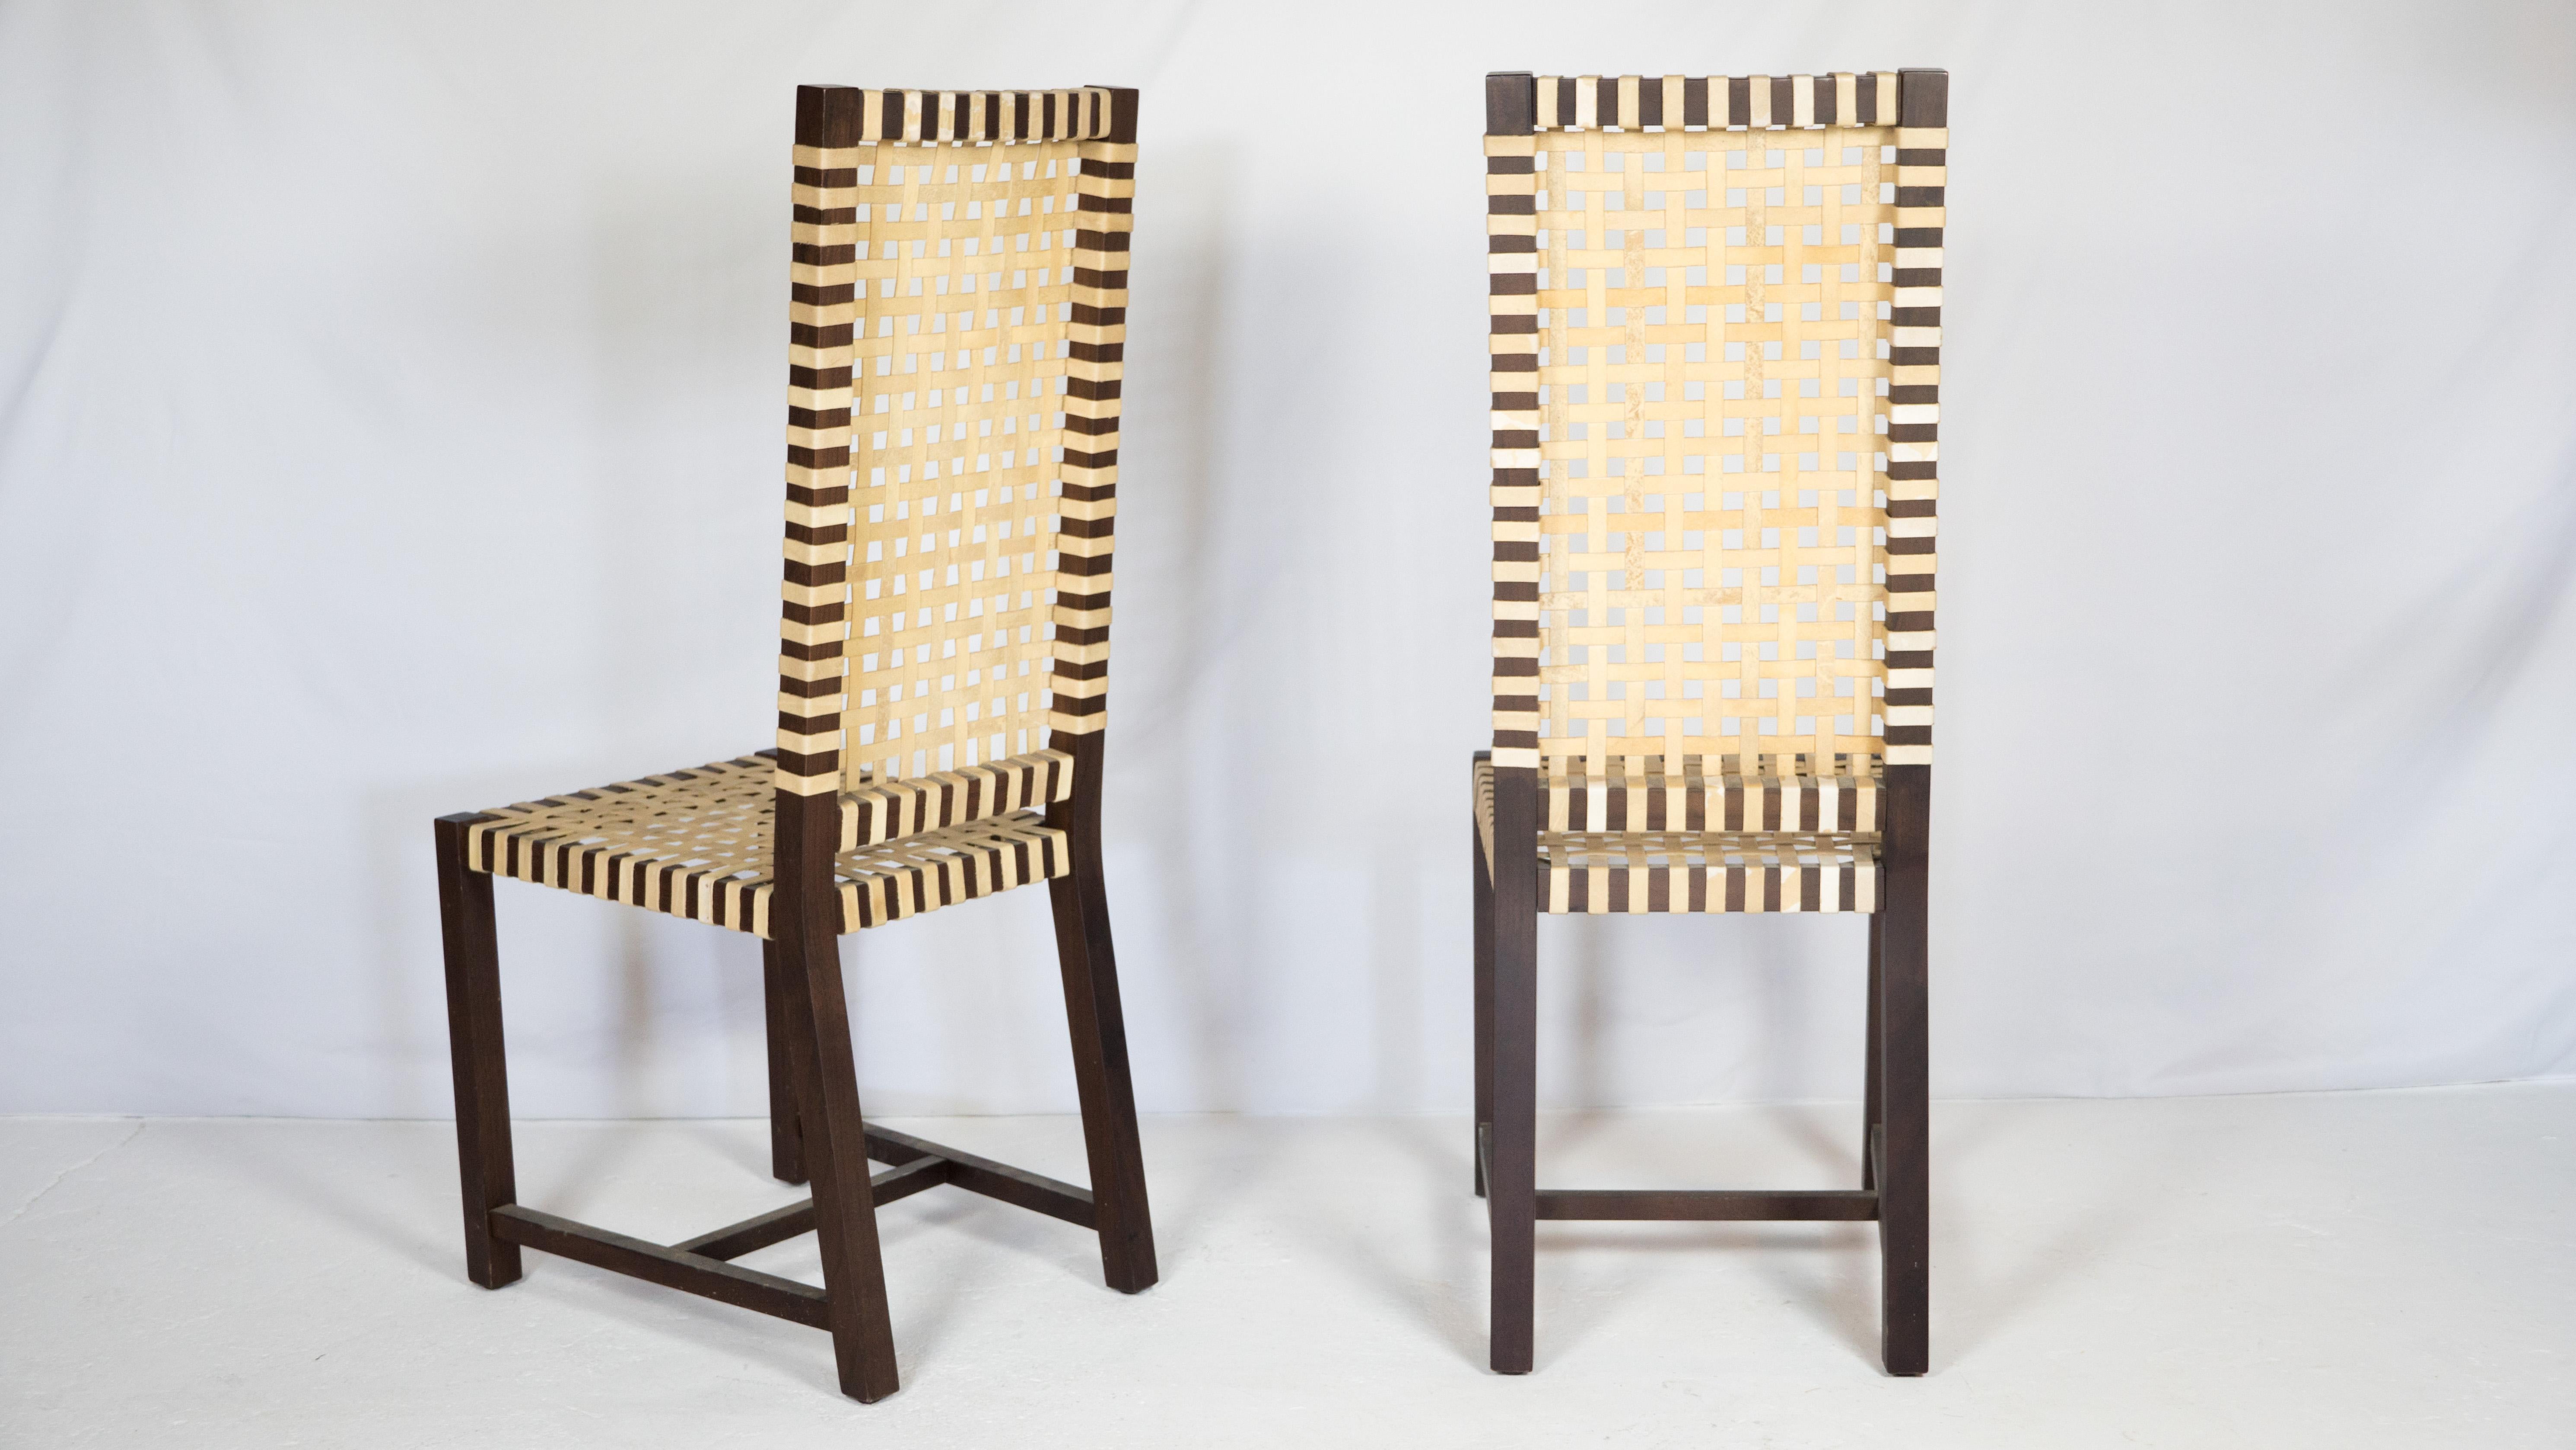 1980s Italian Architectural Otto 121' High Back Chairs by Paola Navone for Gerva For Sale 3